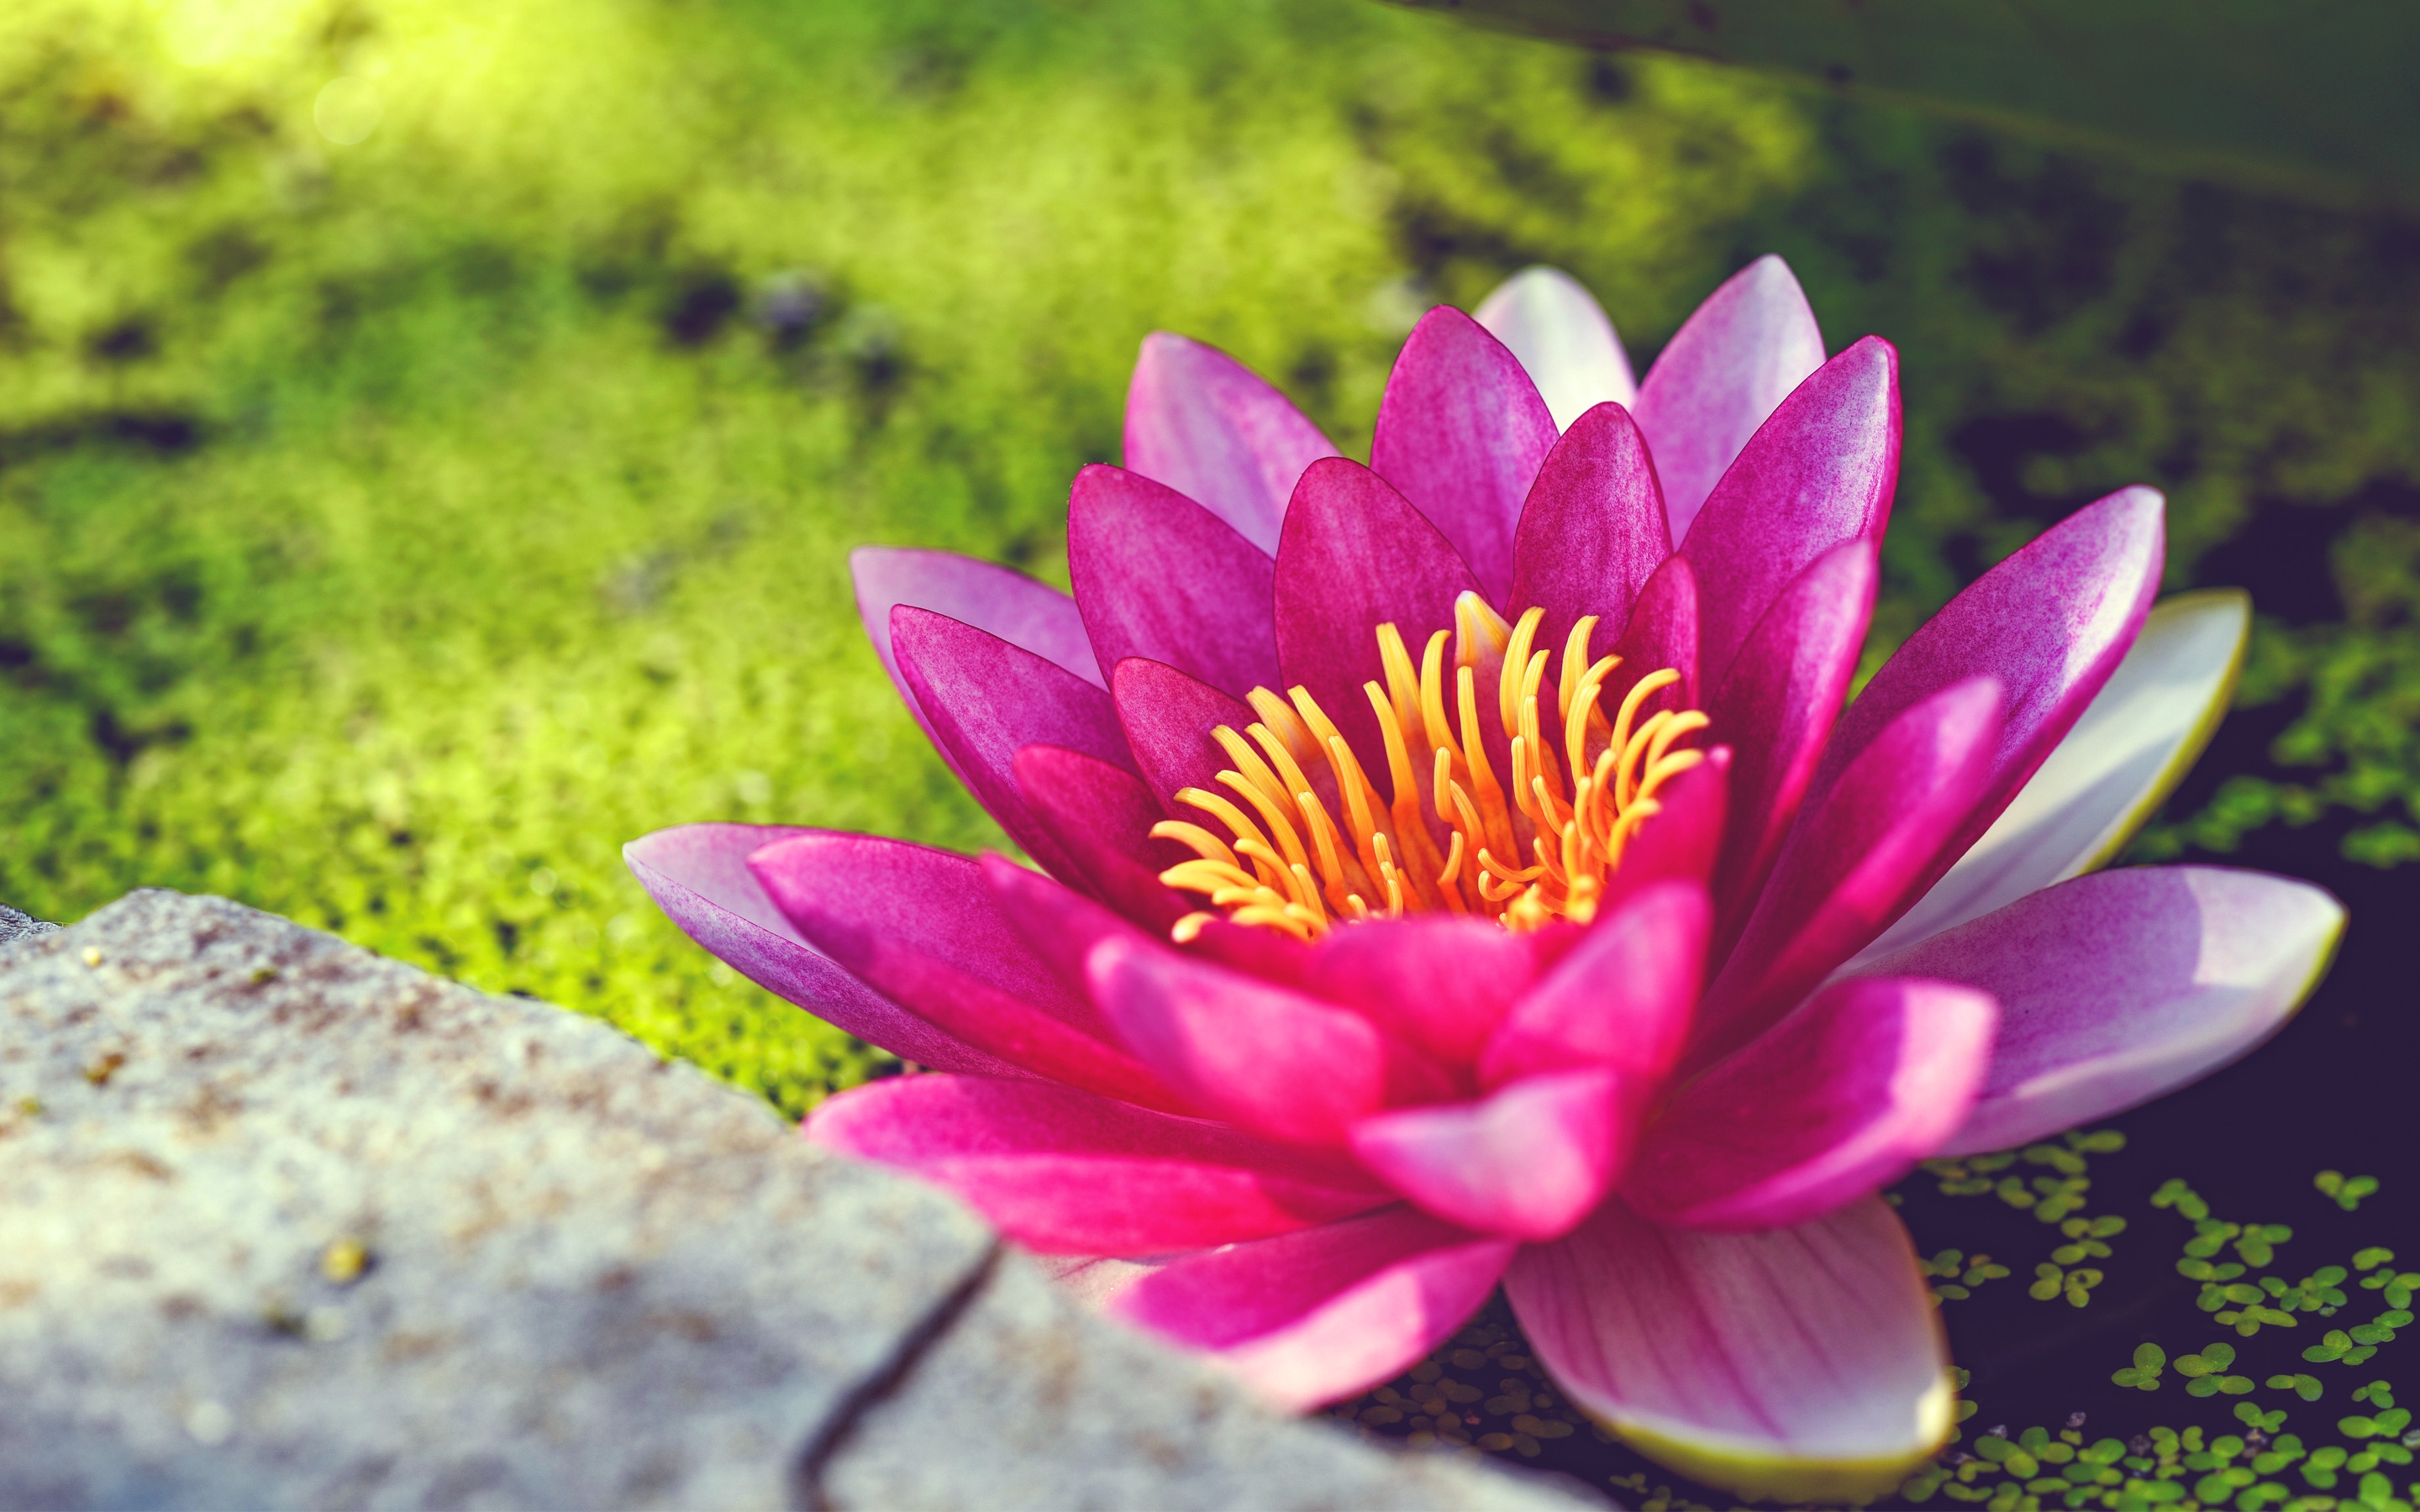 Pink Water Lily Flower Wallpaper in jpg format for free download